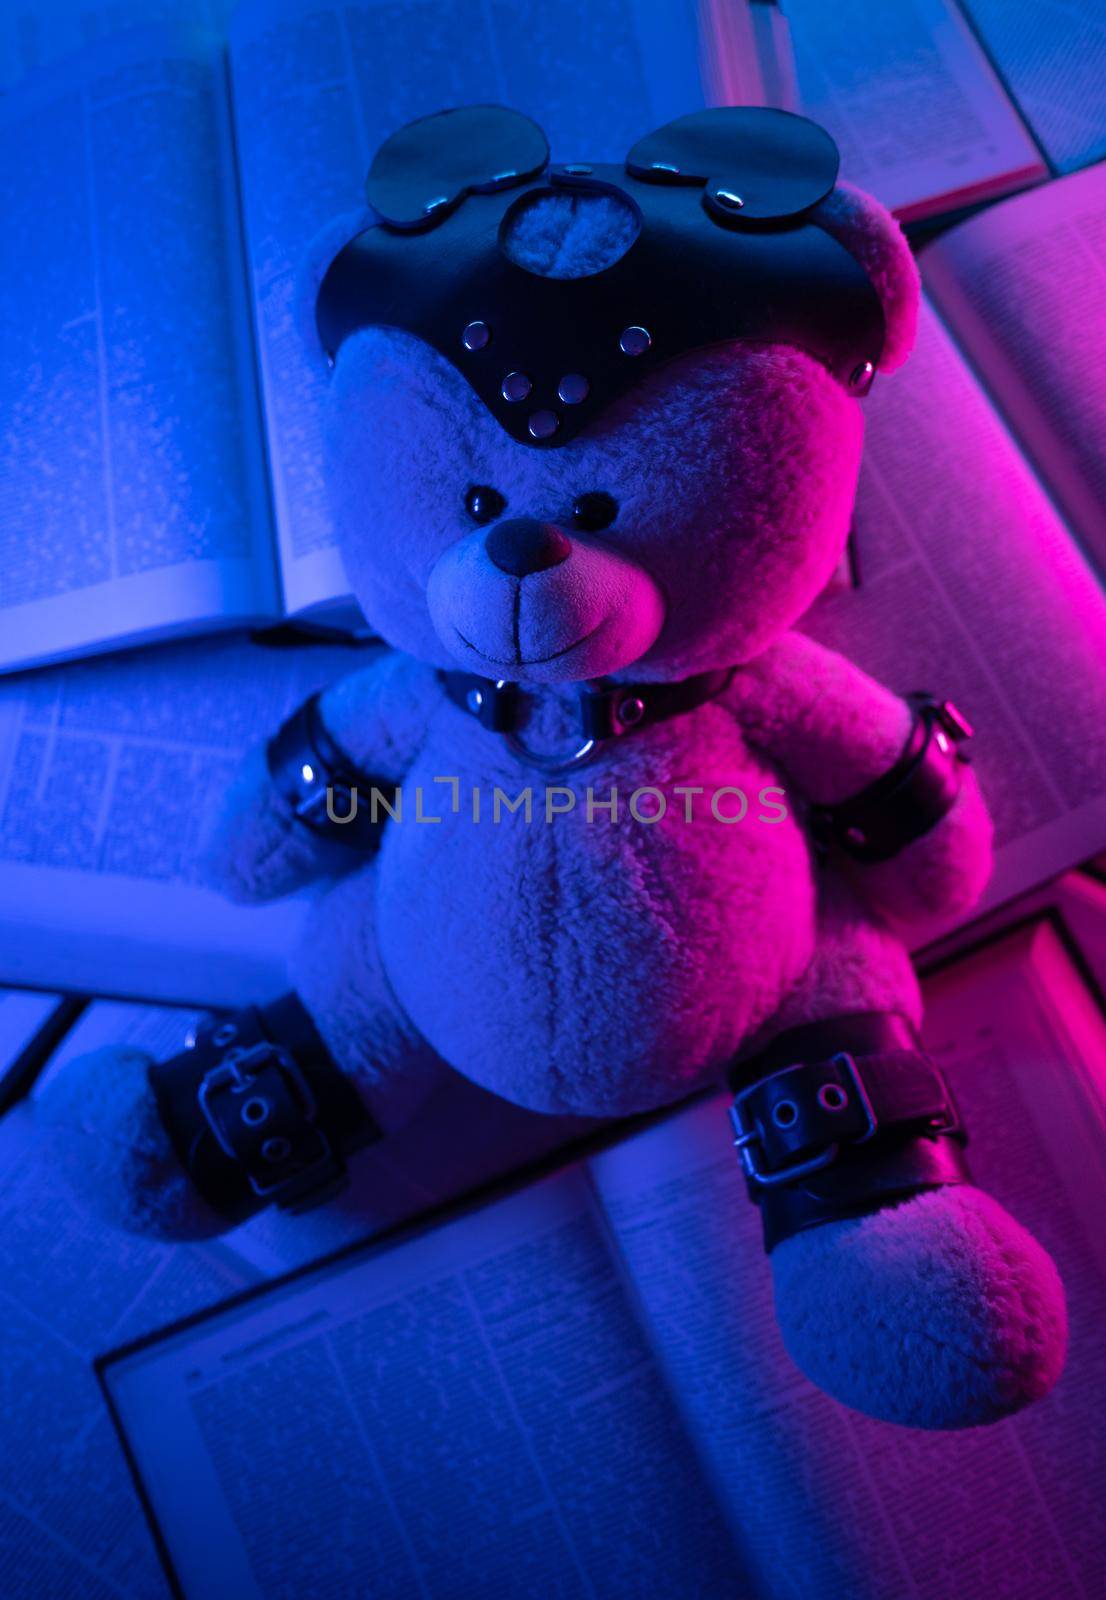 accessory for bdsm games on a teddy bear by Rotozey